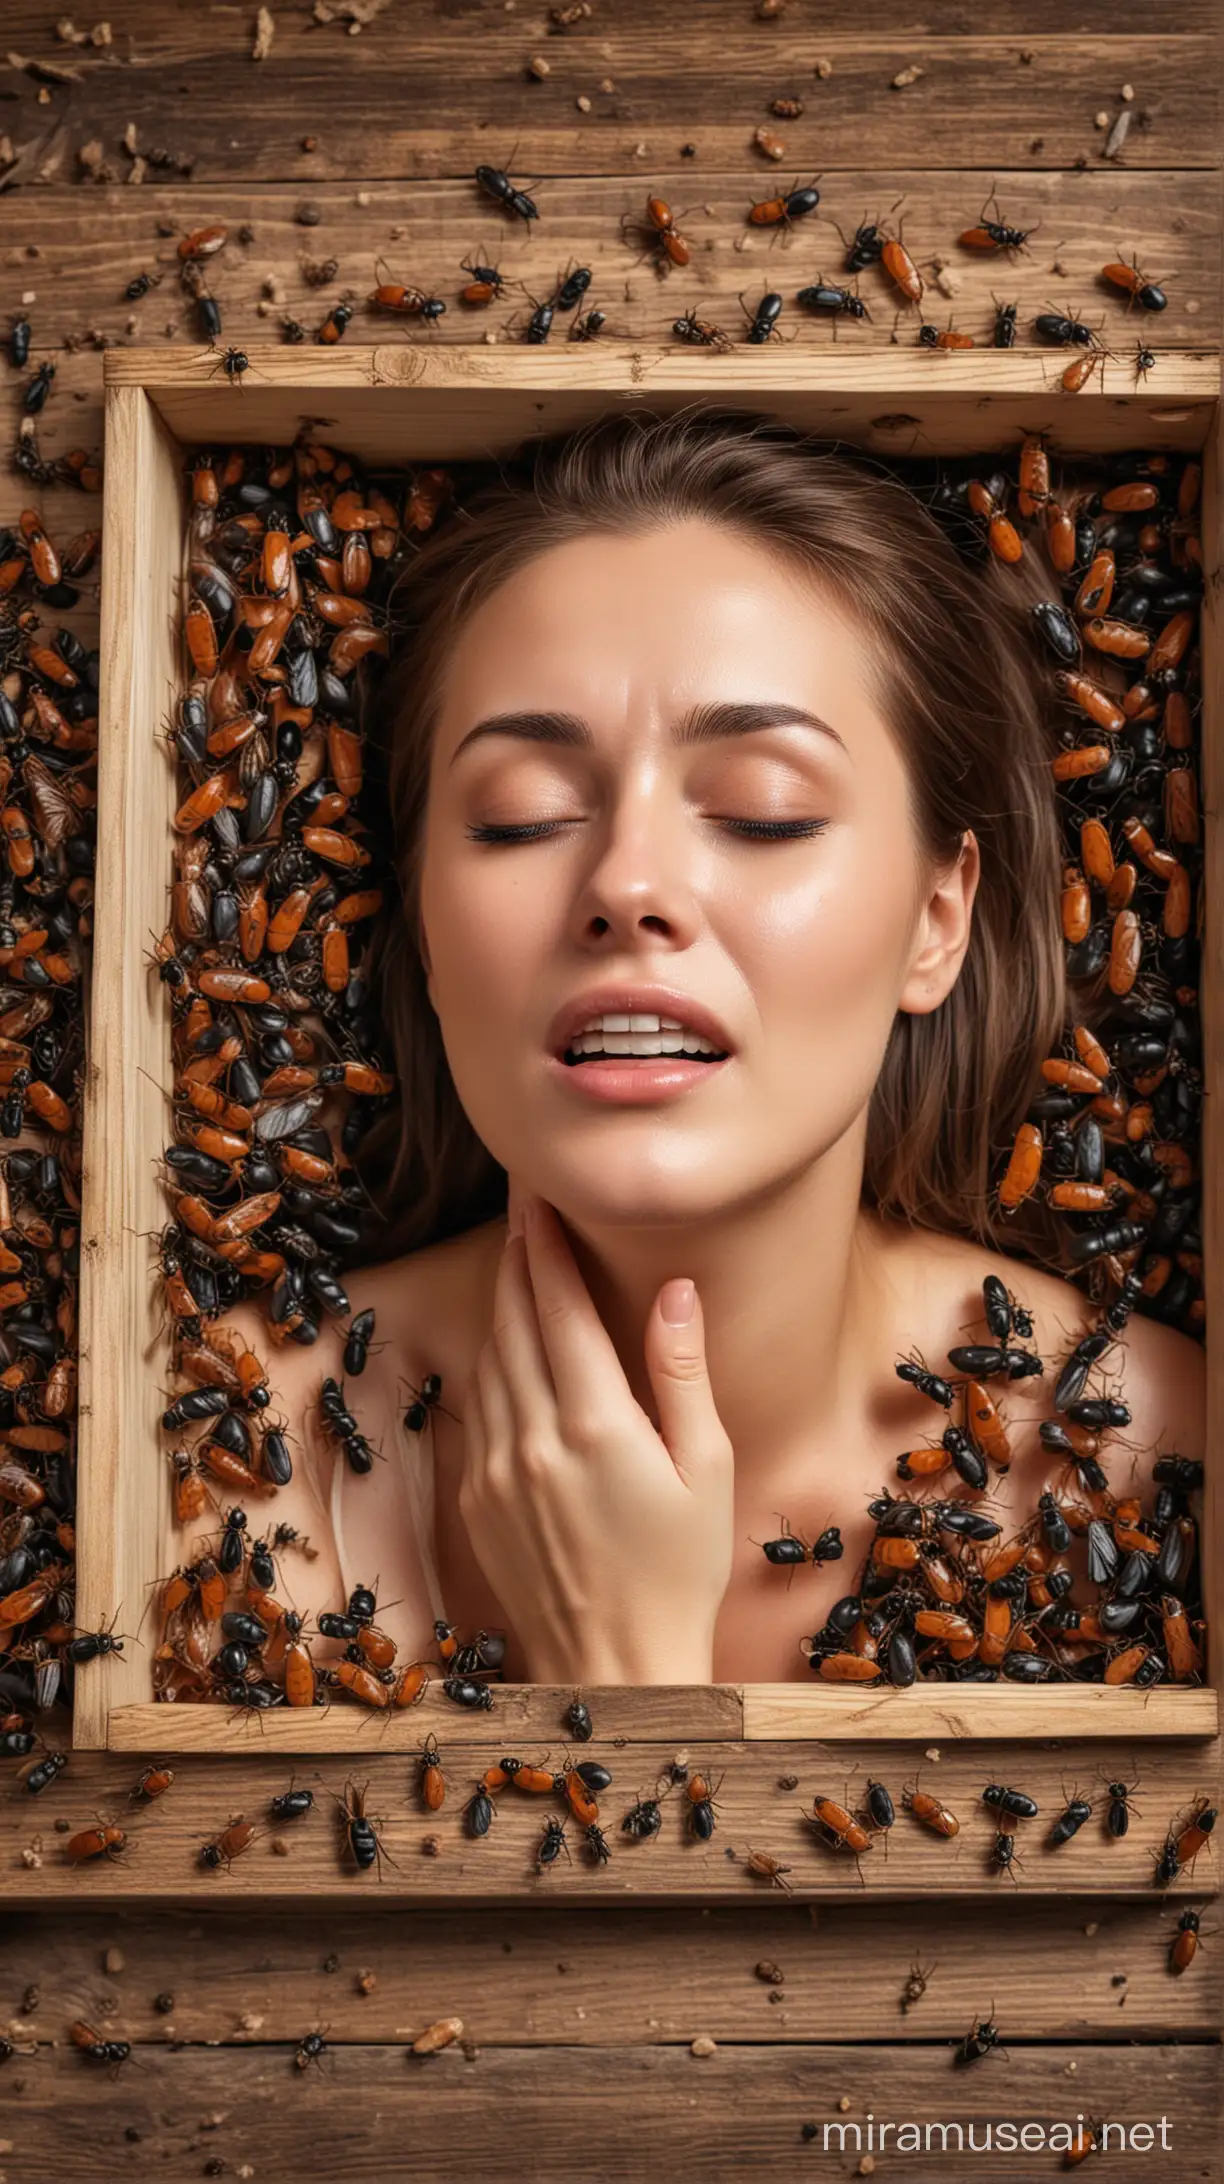 Crying woman laying in wooden box and many insects are eating her 